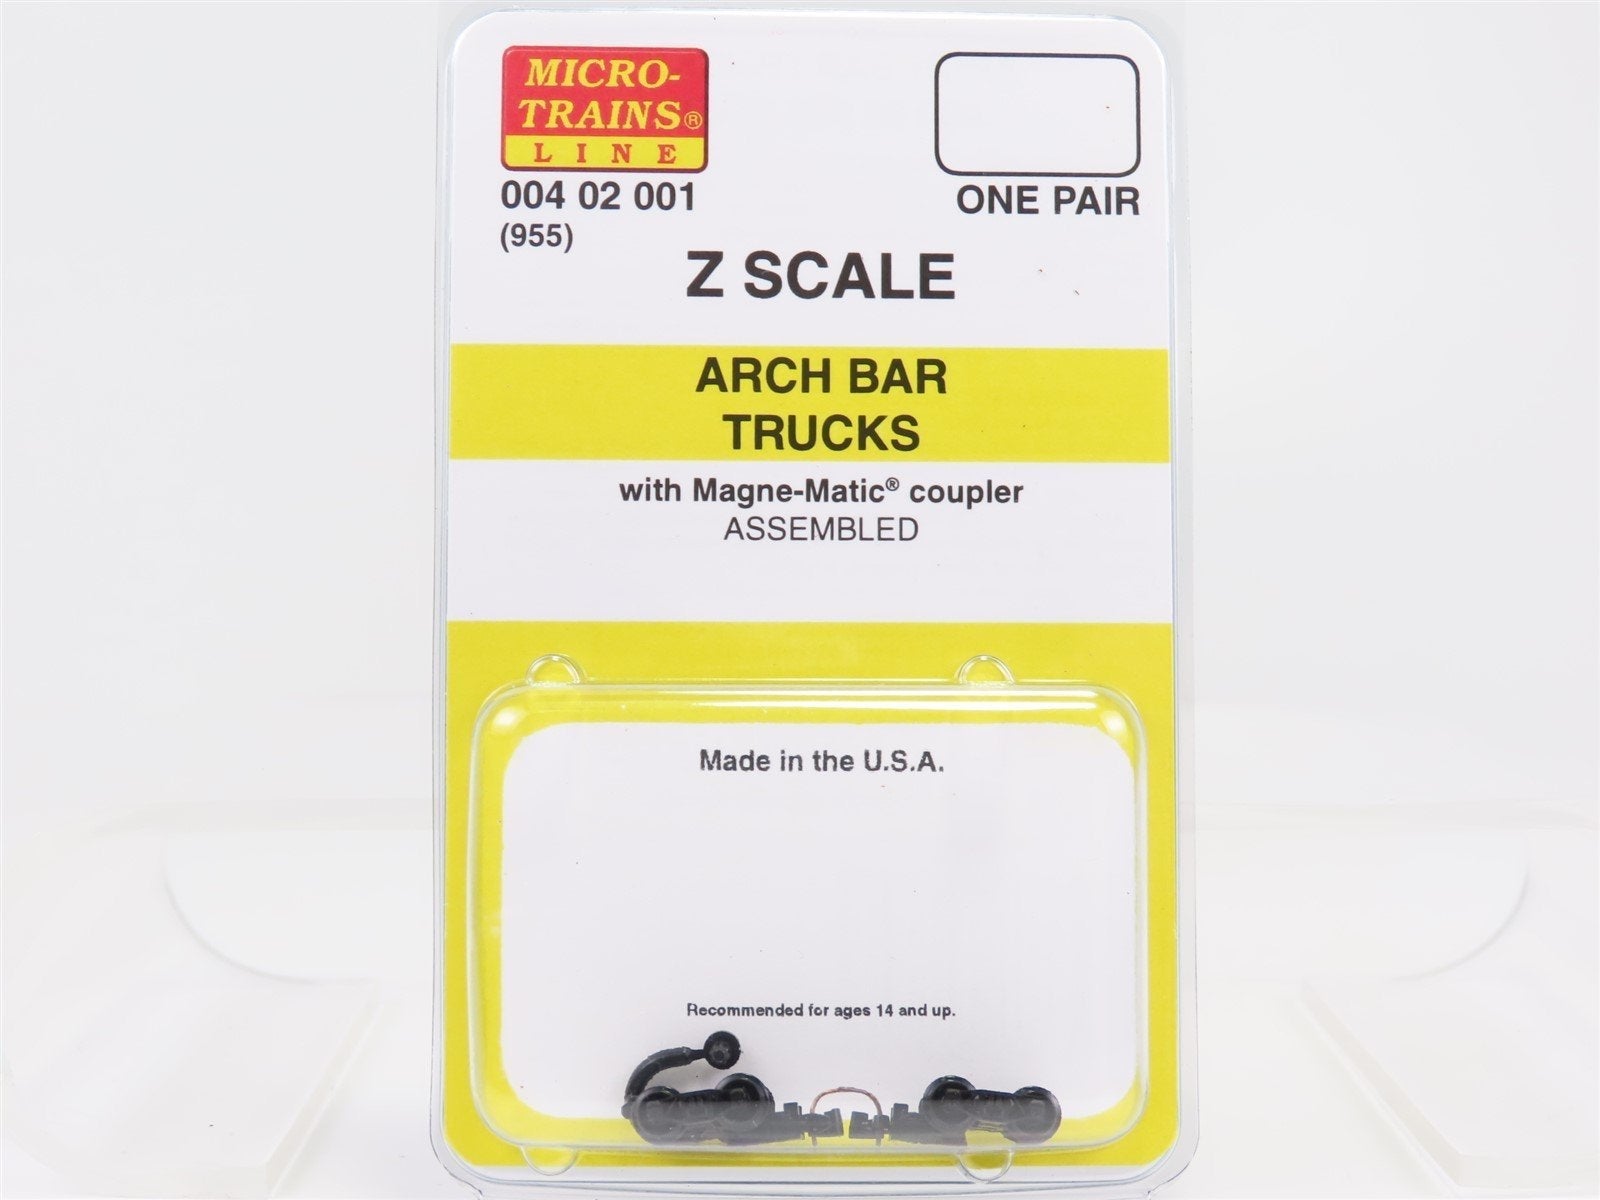 Z Scale Micro-Trains MTL 00402001 (955) Arch Bar Trucks w/ Magne-Matic Couplers